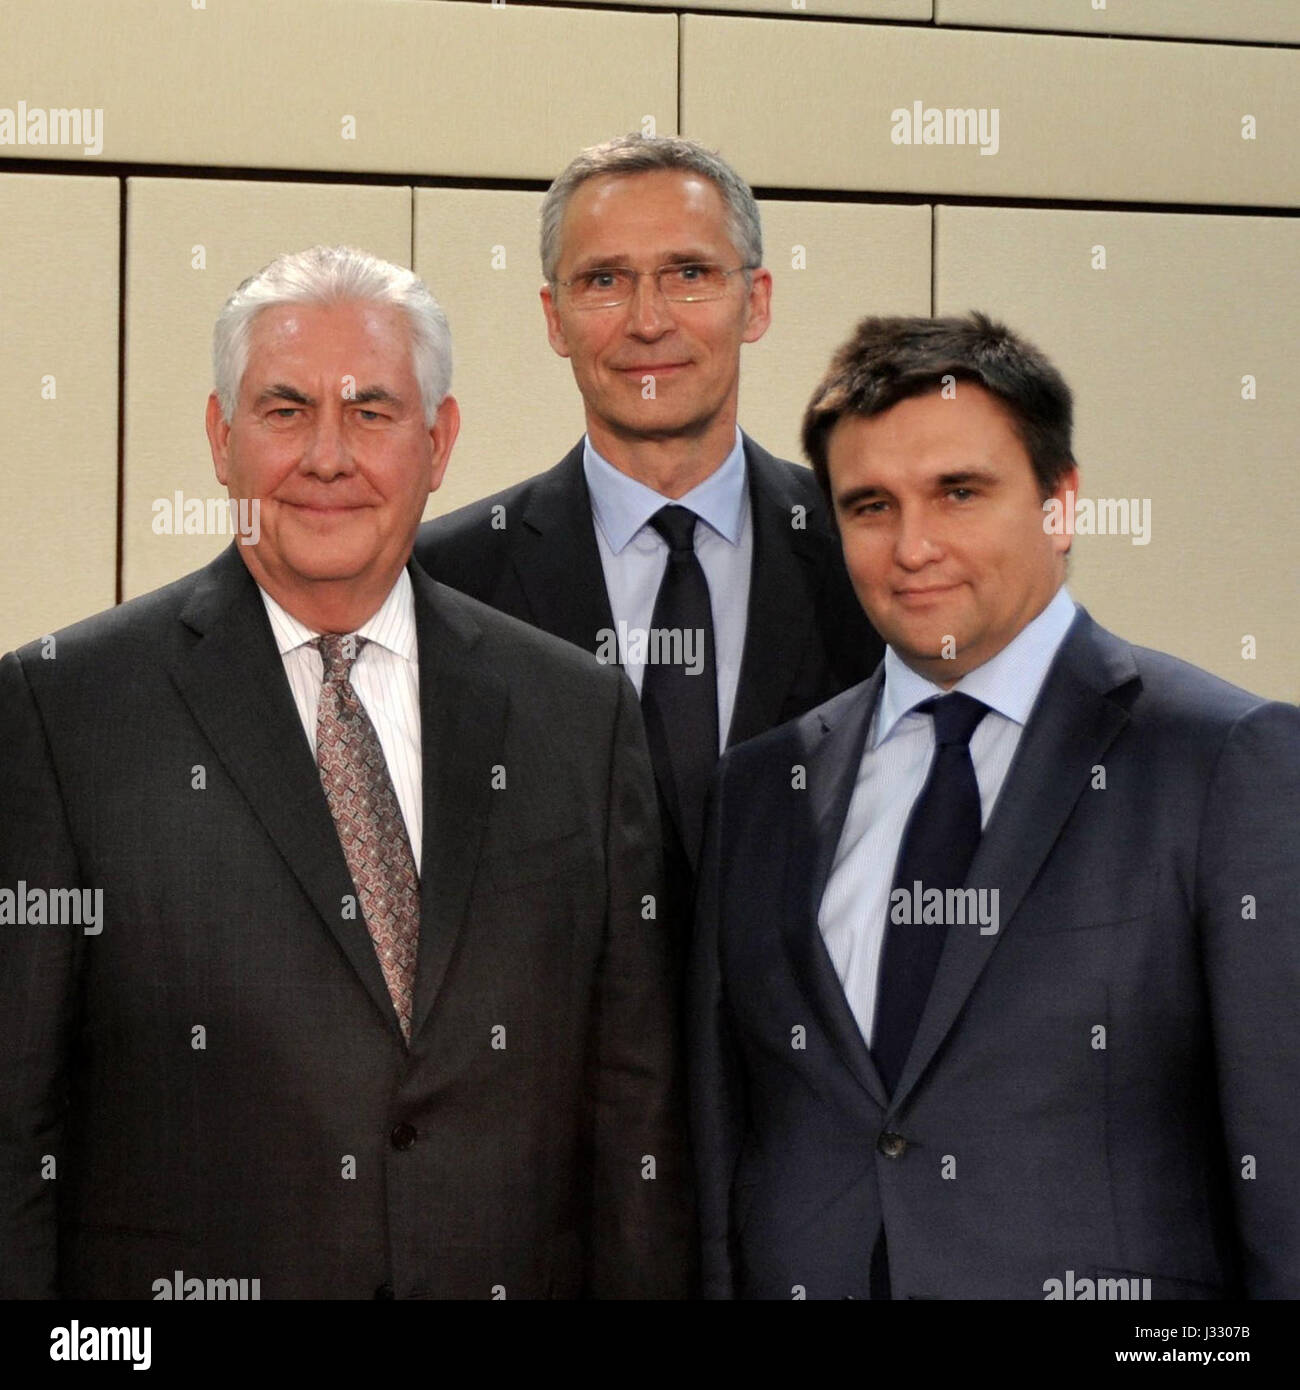 U.S. Secretary of State Rex Tillerson poses for a photo with NATO Secretary General Jens Stoltenberg and Ukraine Foreign Minister Pavlo Klimkin at the NATO-Ukraine Commission at NATO Headquarters in Brussels, Belgium, on March 31, 2017. Stock Photo